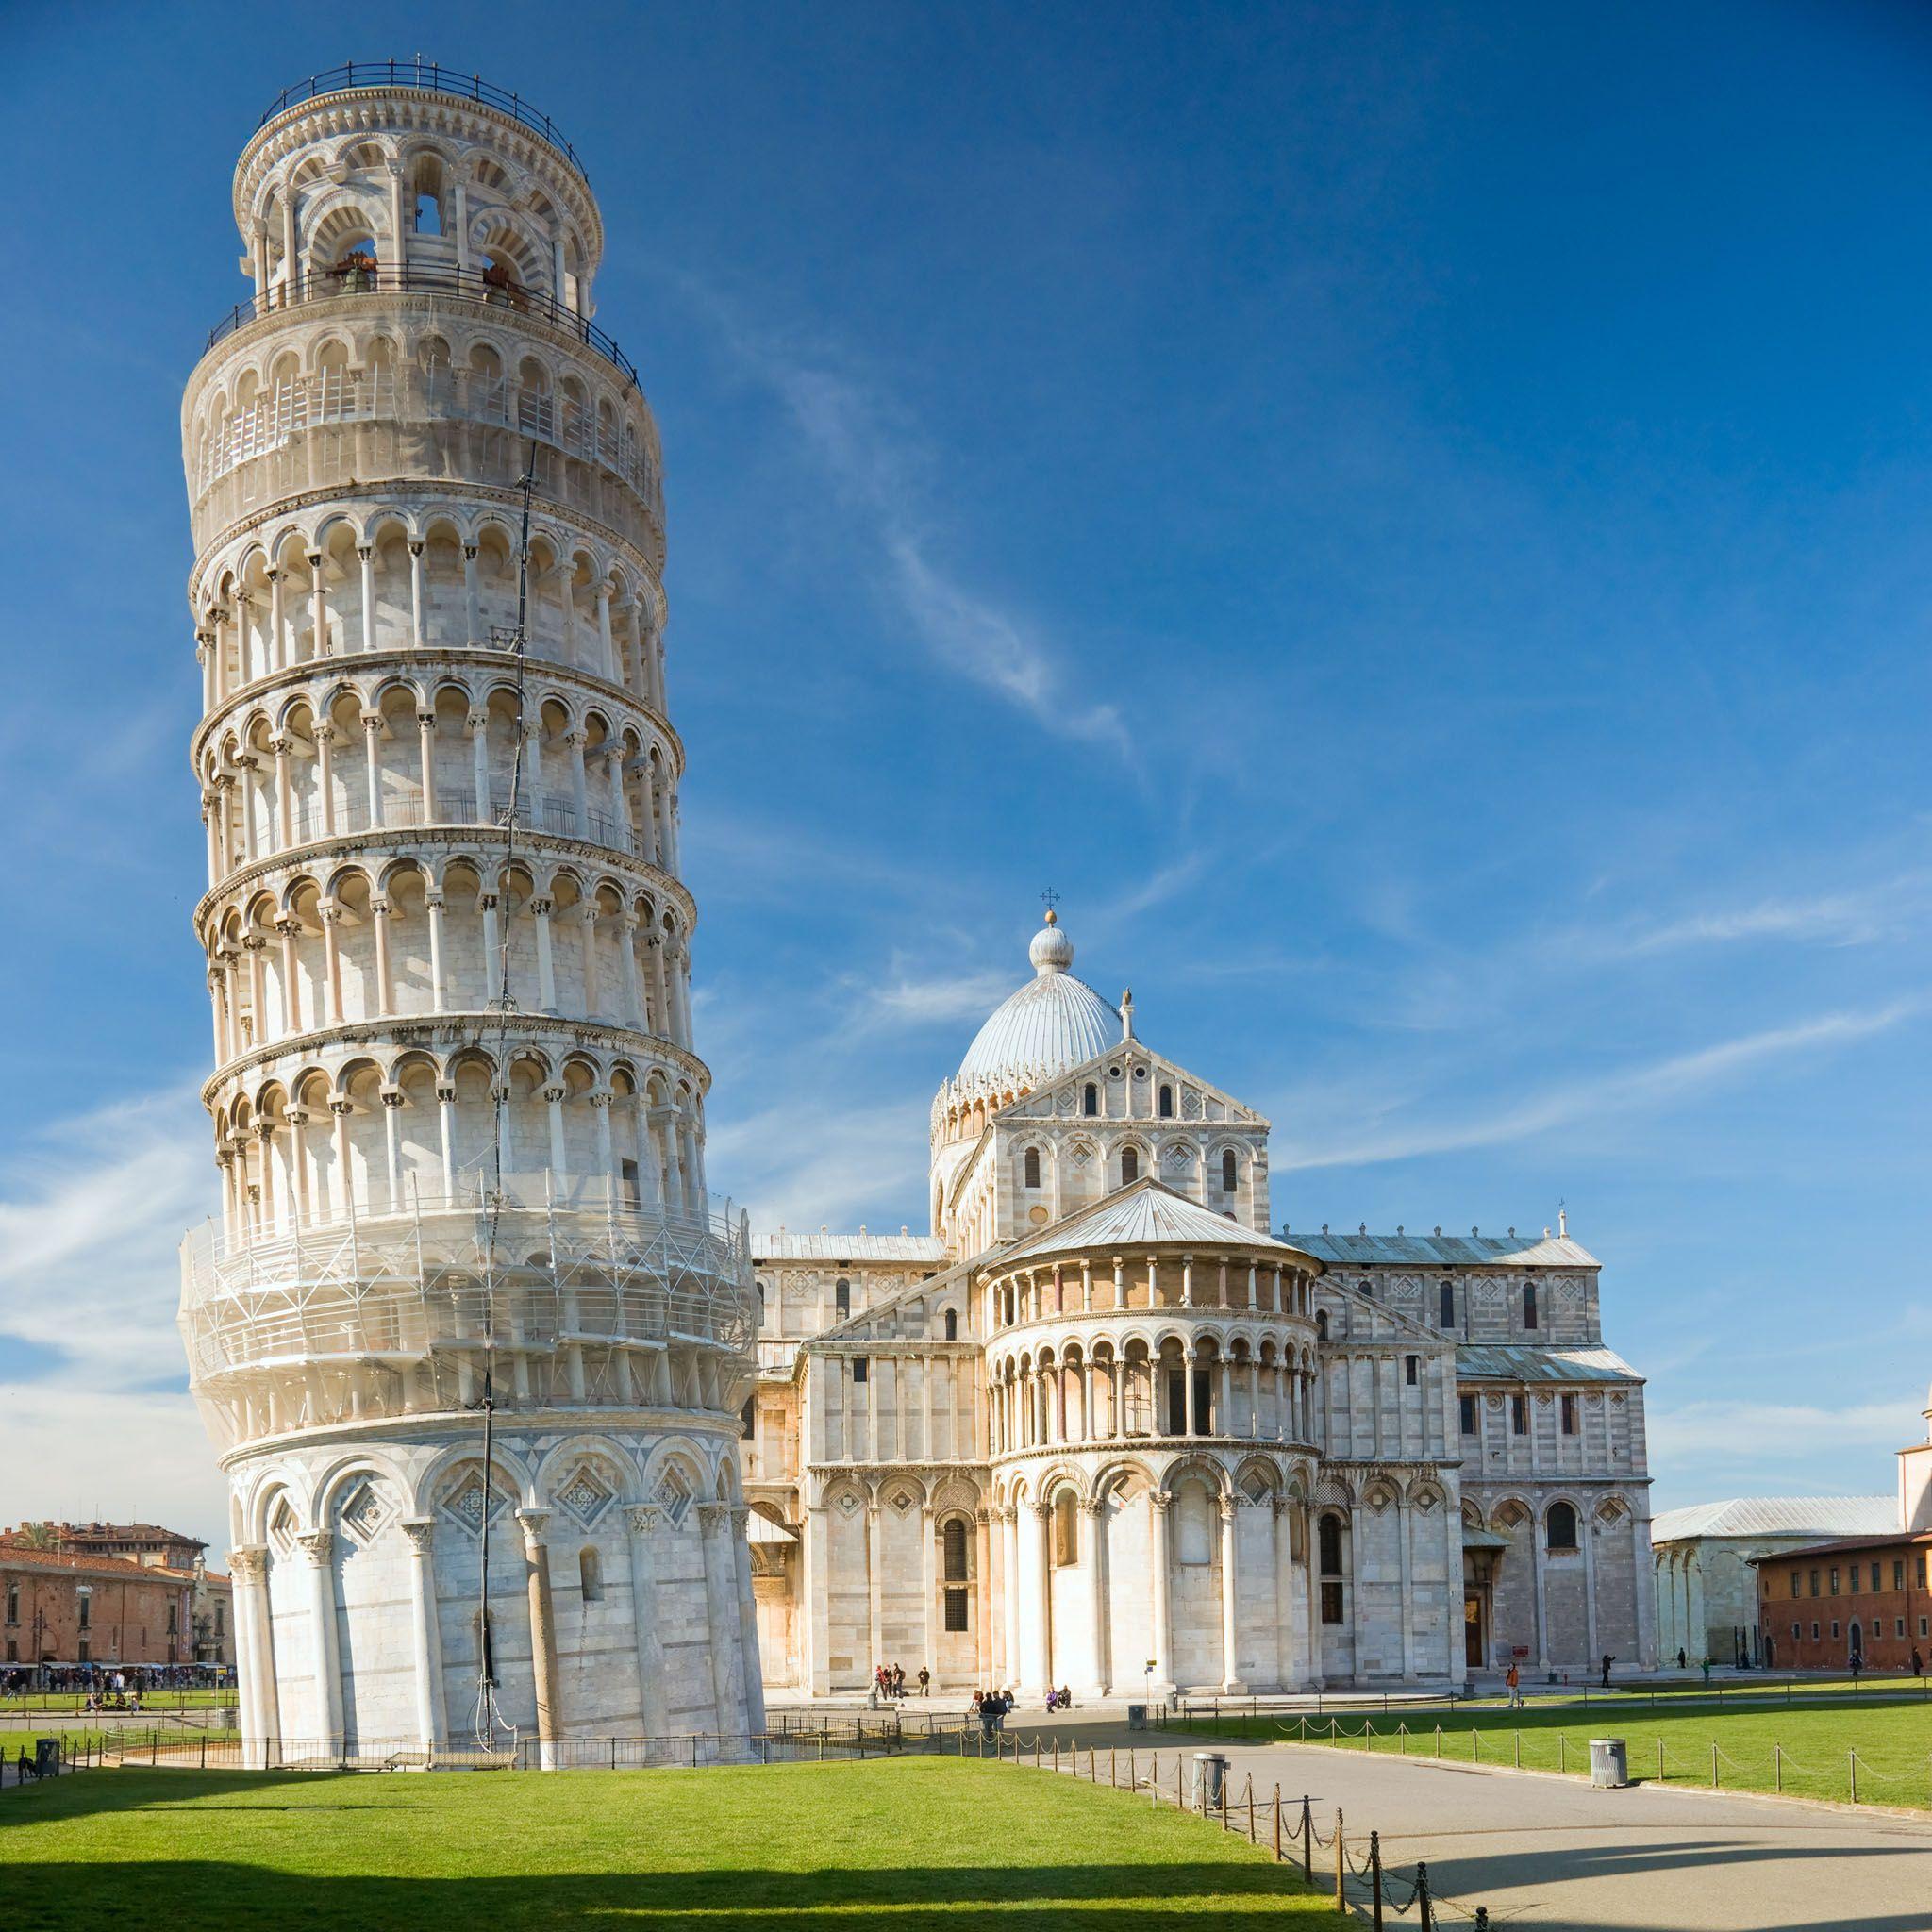 The Tower of Pisa Why Does it Lean?